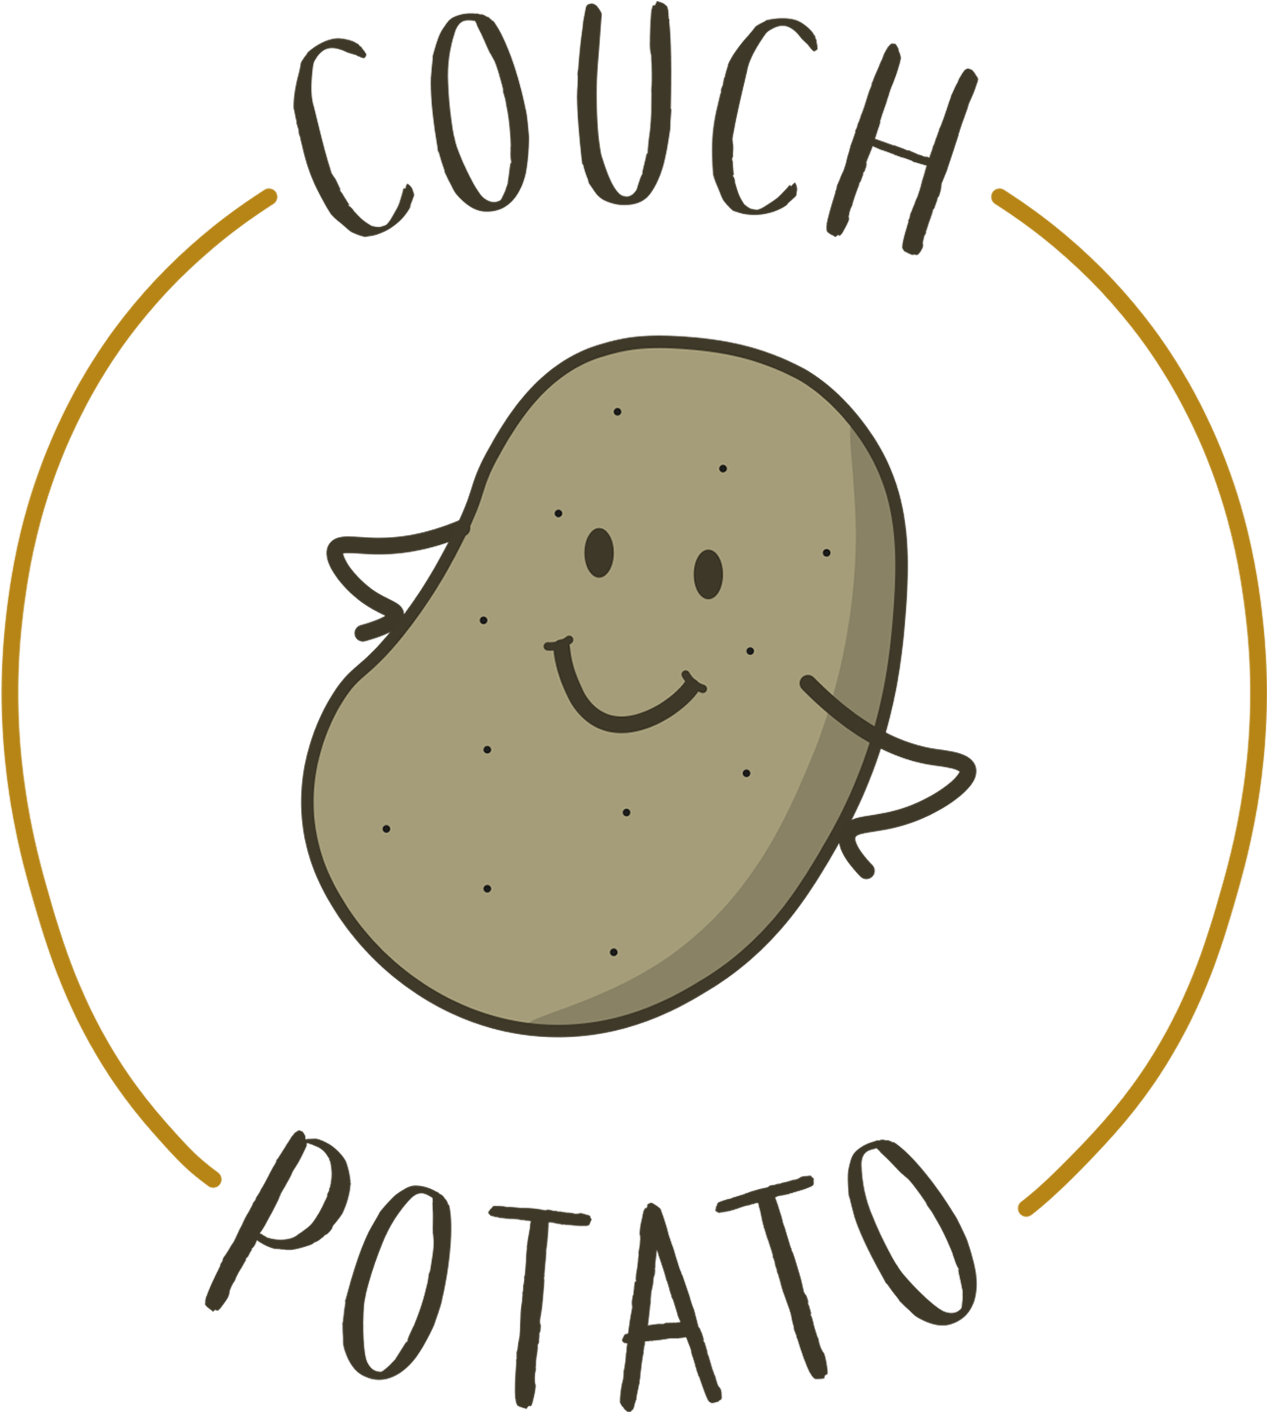 Bold, Playful, Cafe Logo Design For Couch Potato Collective - Bold, Playful, Cafe Logo Design For Couch Potato Collective (1500x1500)